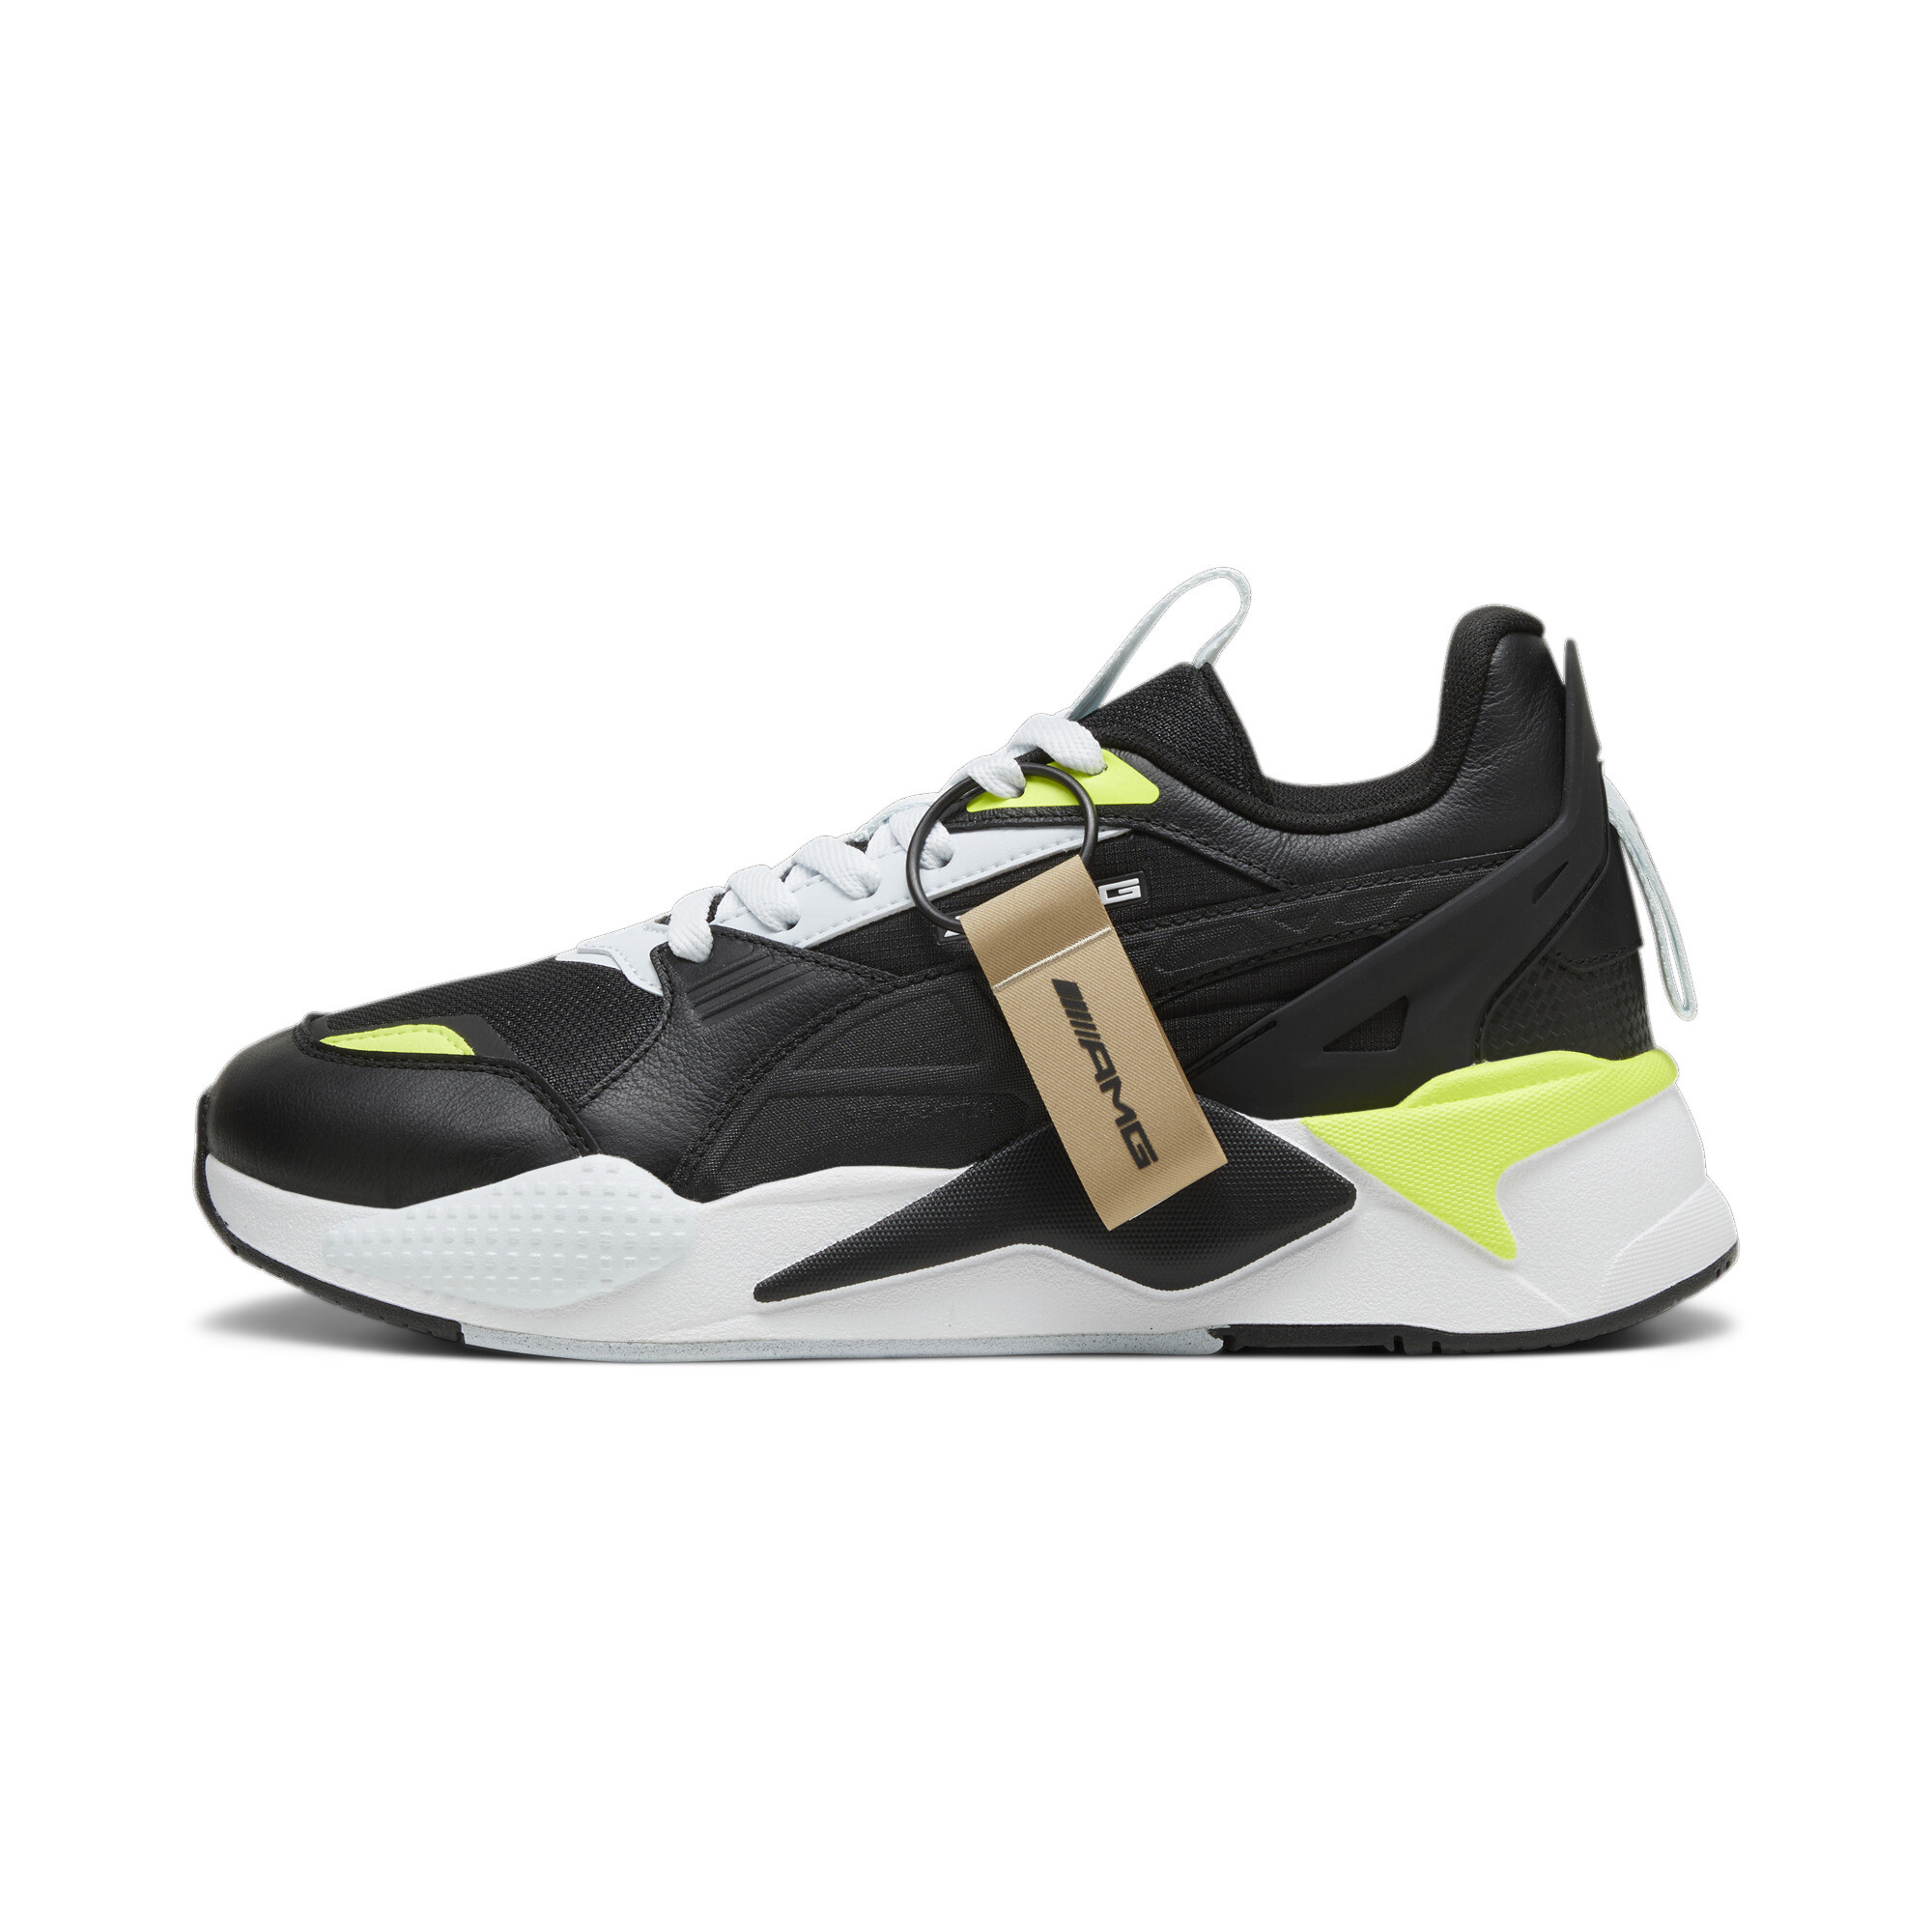 Puma AMG RS-X T Sneakers, Black, Size 38, Shoes